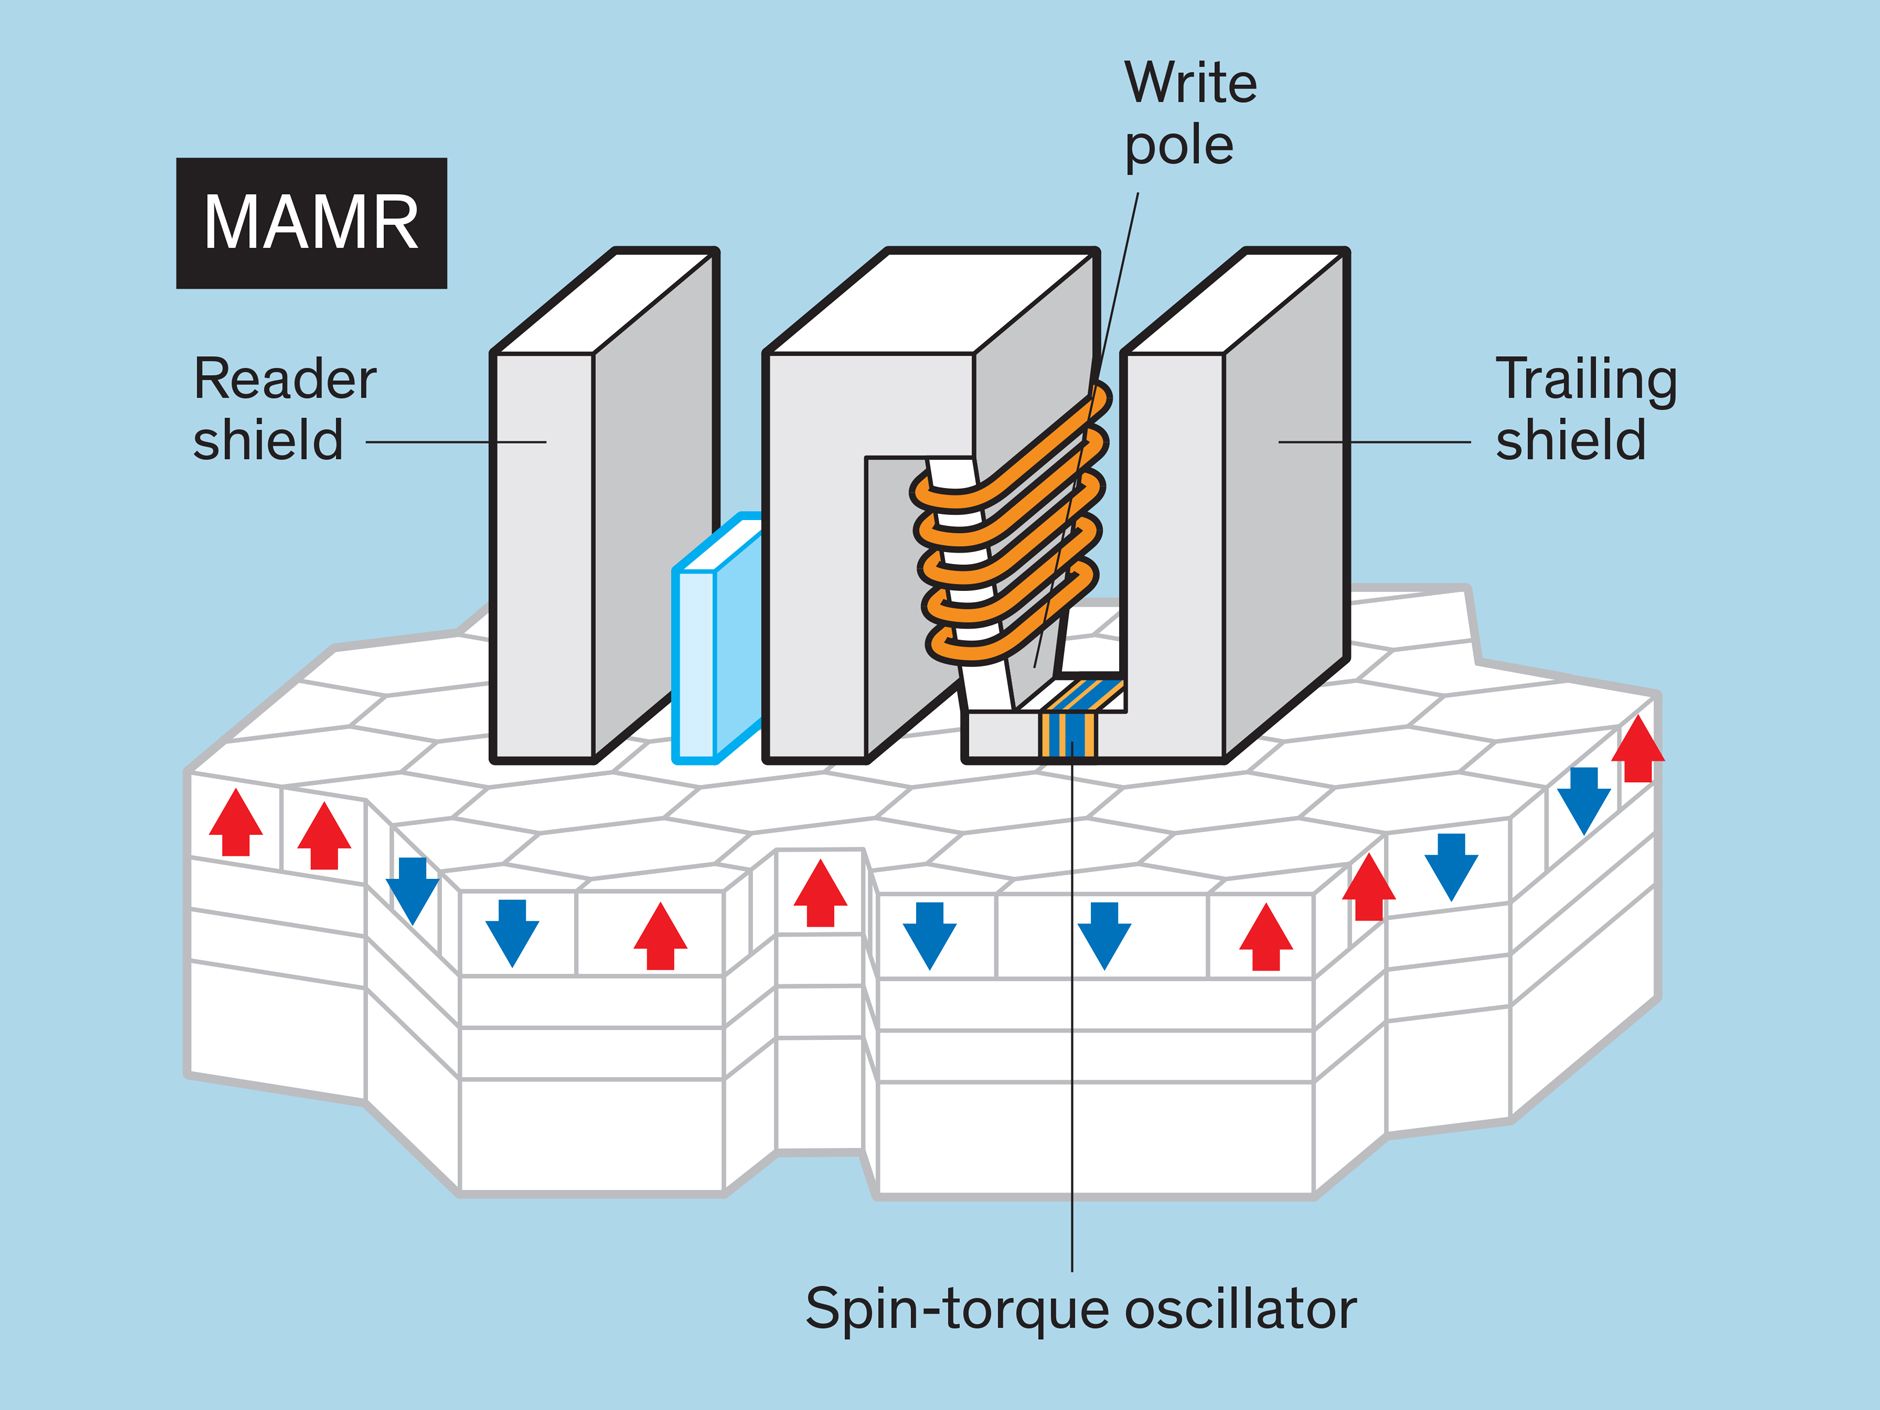 For MAMR, a microwave field produced by a component called a spin-torque oscillator similarly influences grains and allows them to be flipped.